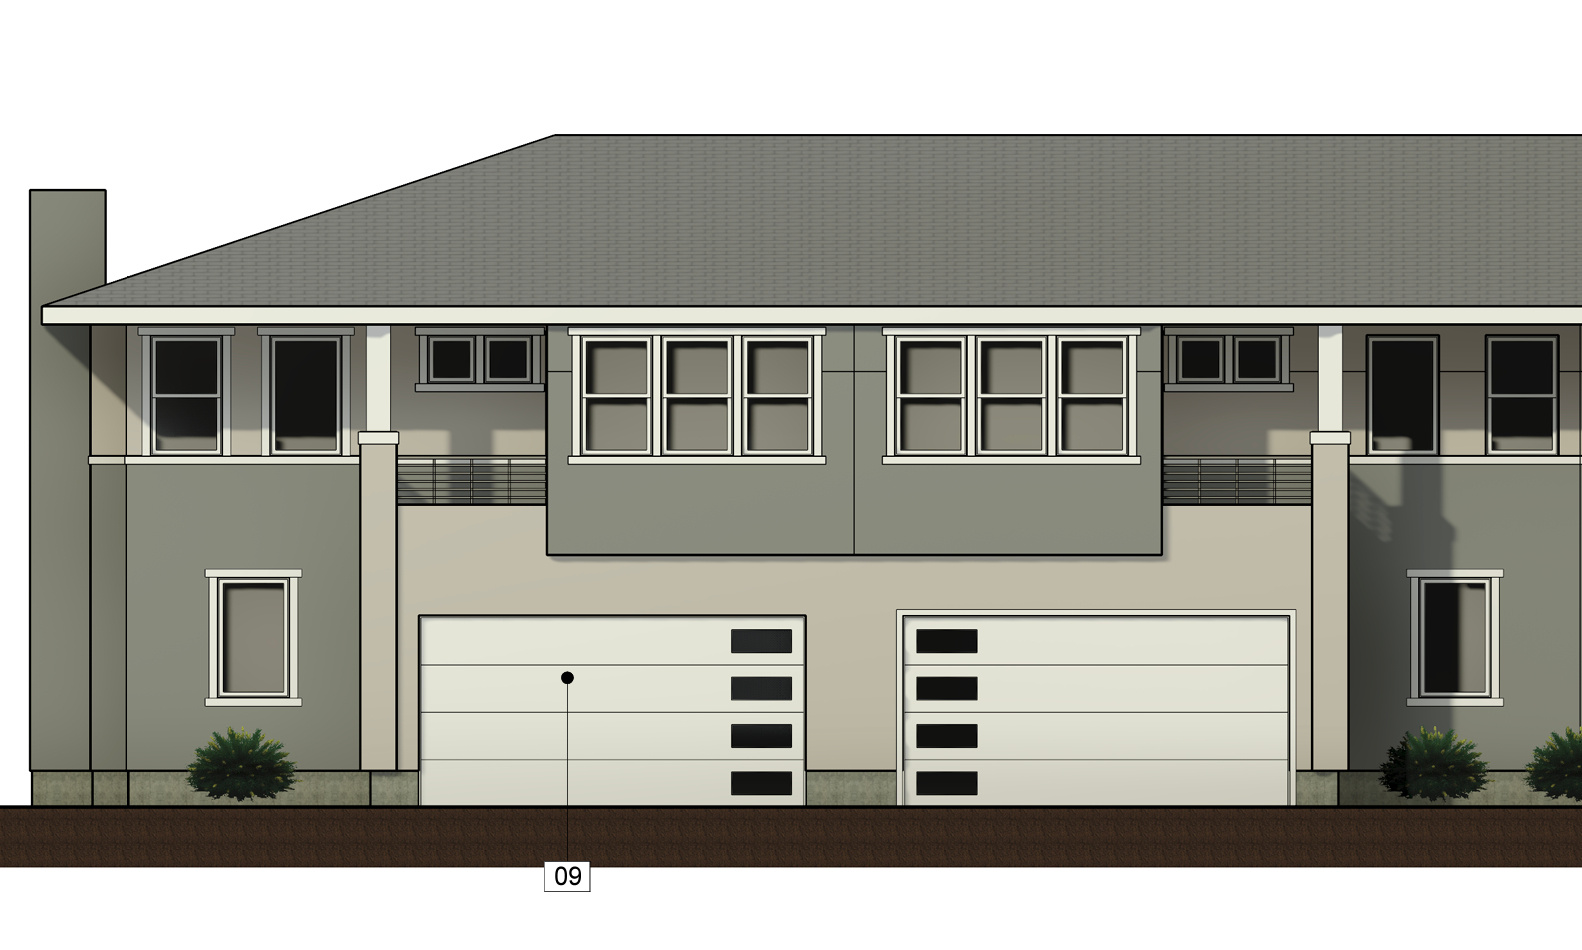 Rear Elevation - Larger balconies from Primary Suite